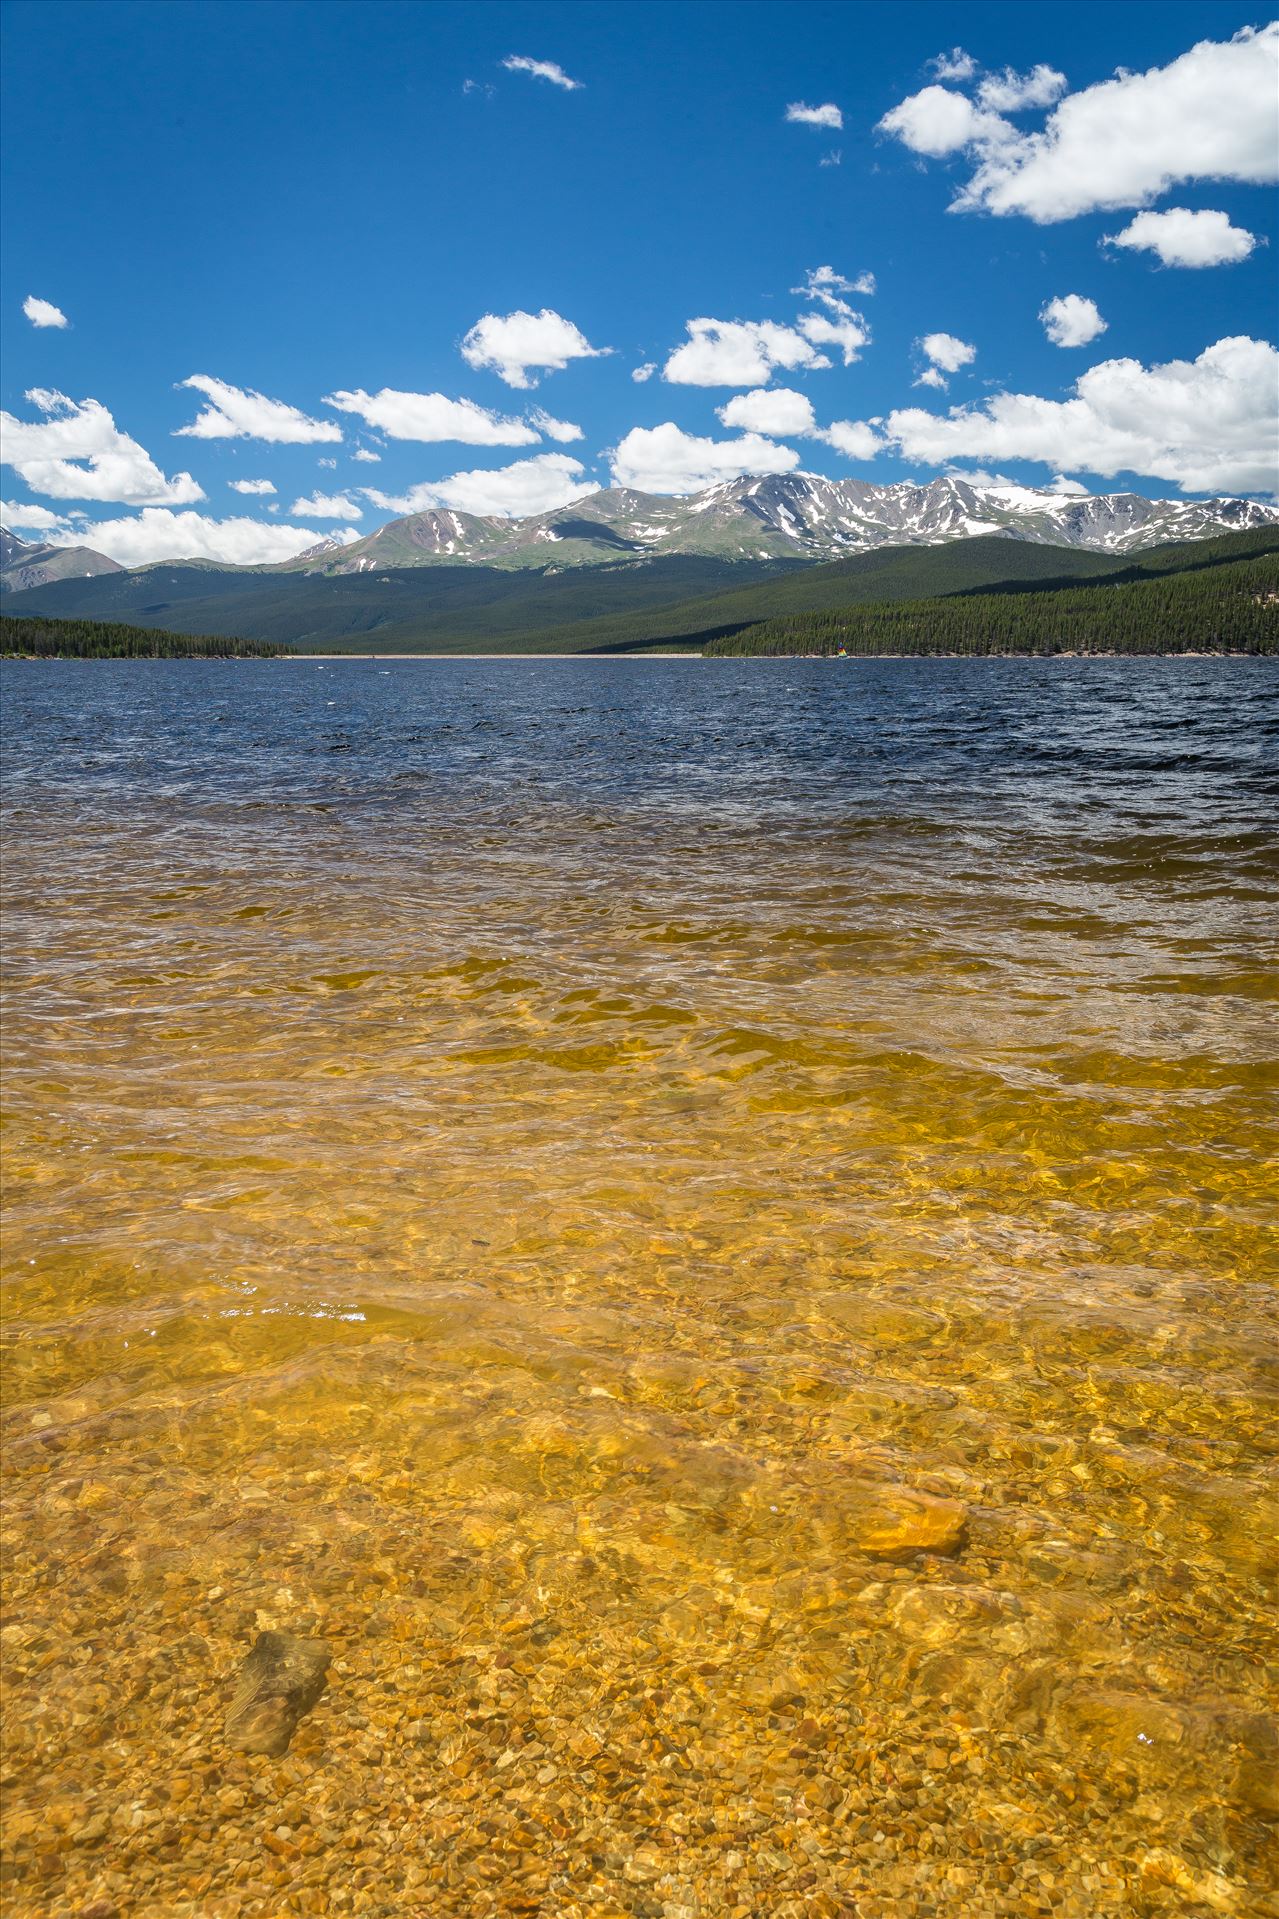 Clear Water at Turquoise Lake - Summer at Turquoise Lake, Leadville, Colorado. by Scott Smith Photos